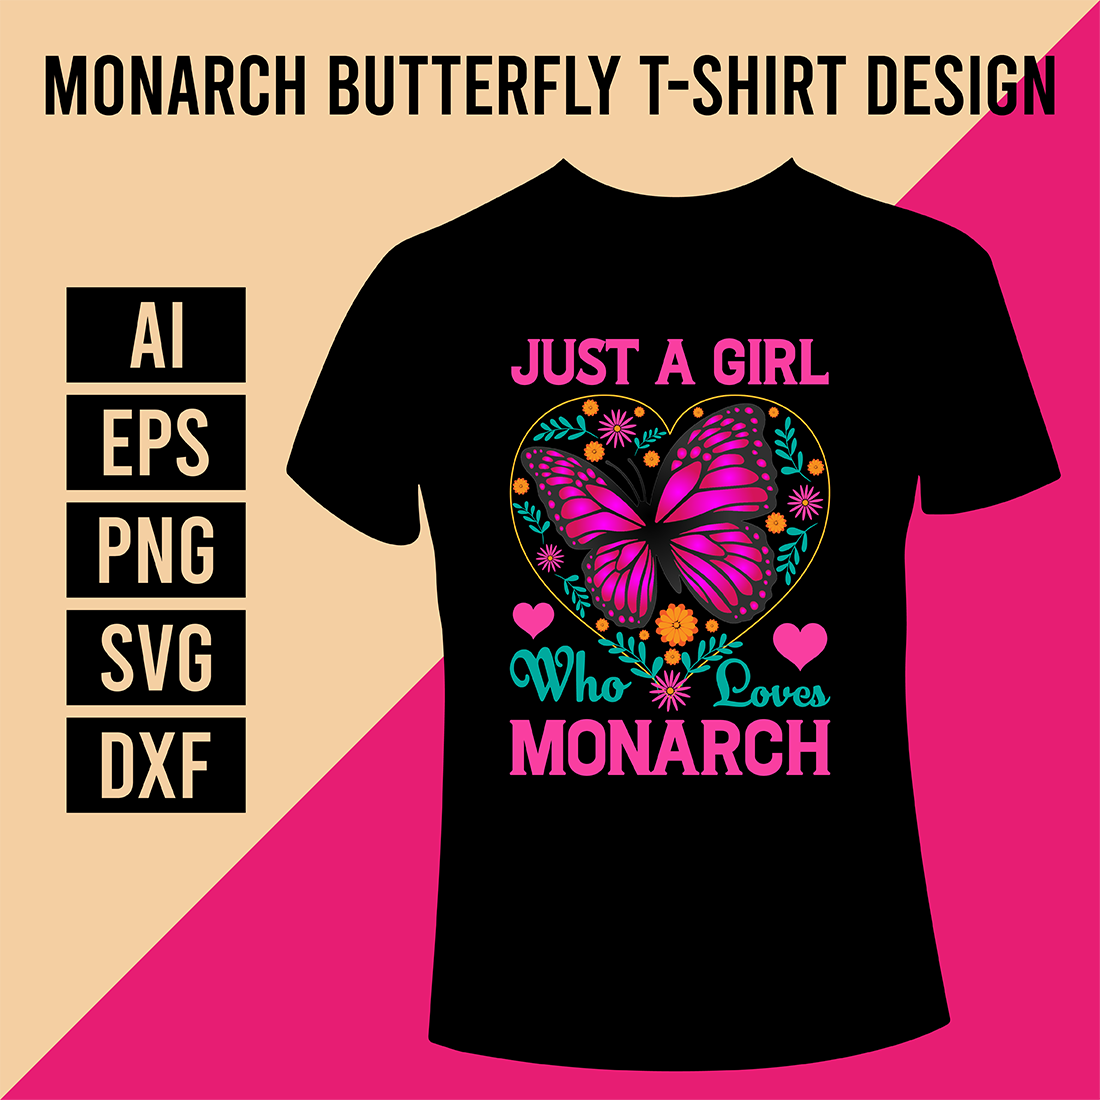 Monarch Butterfly T-Shirt Design cover image.